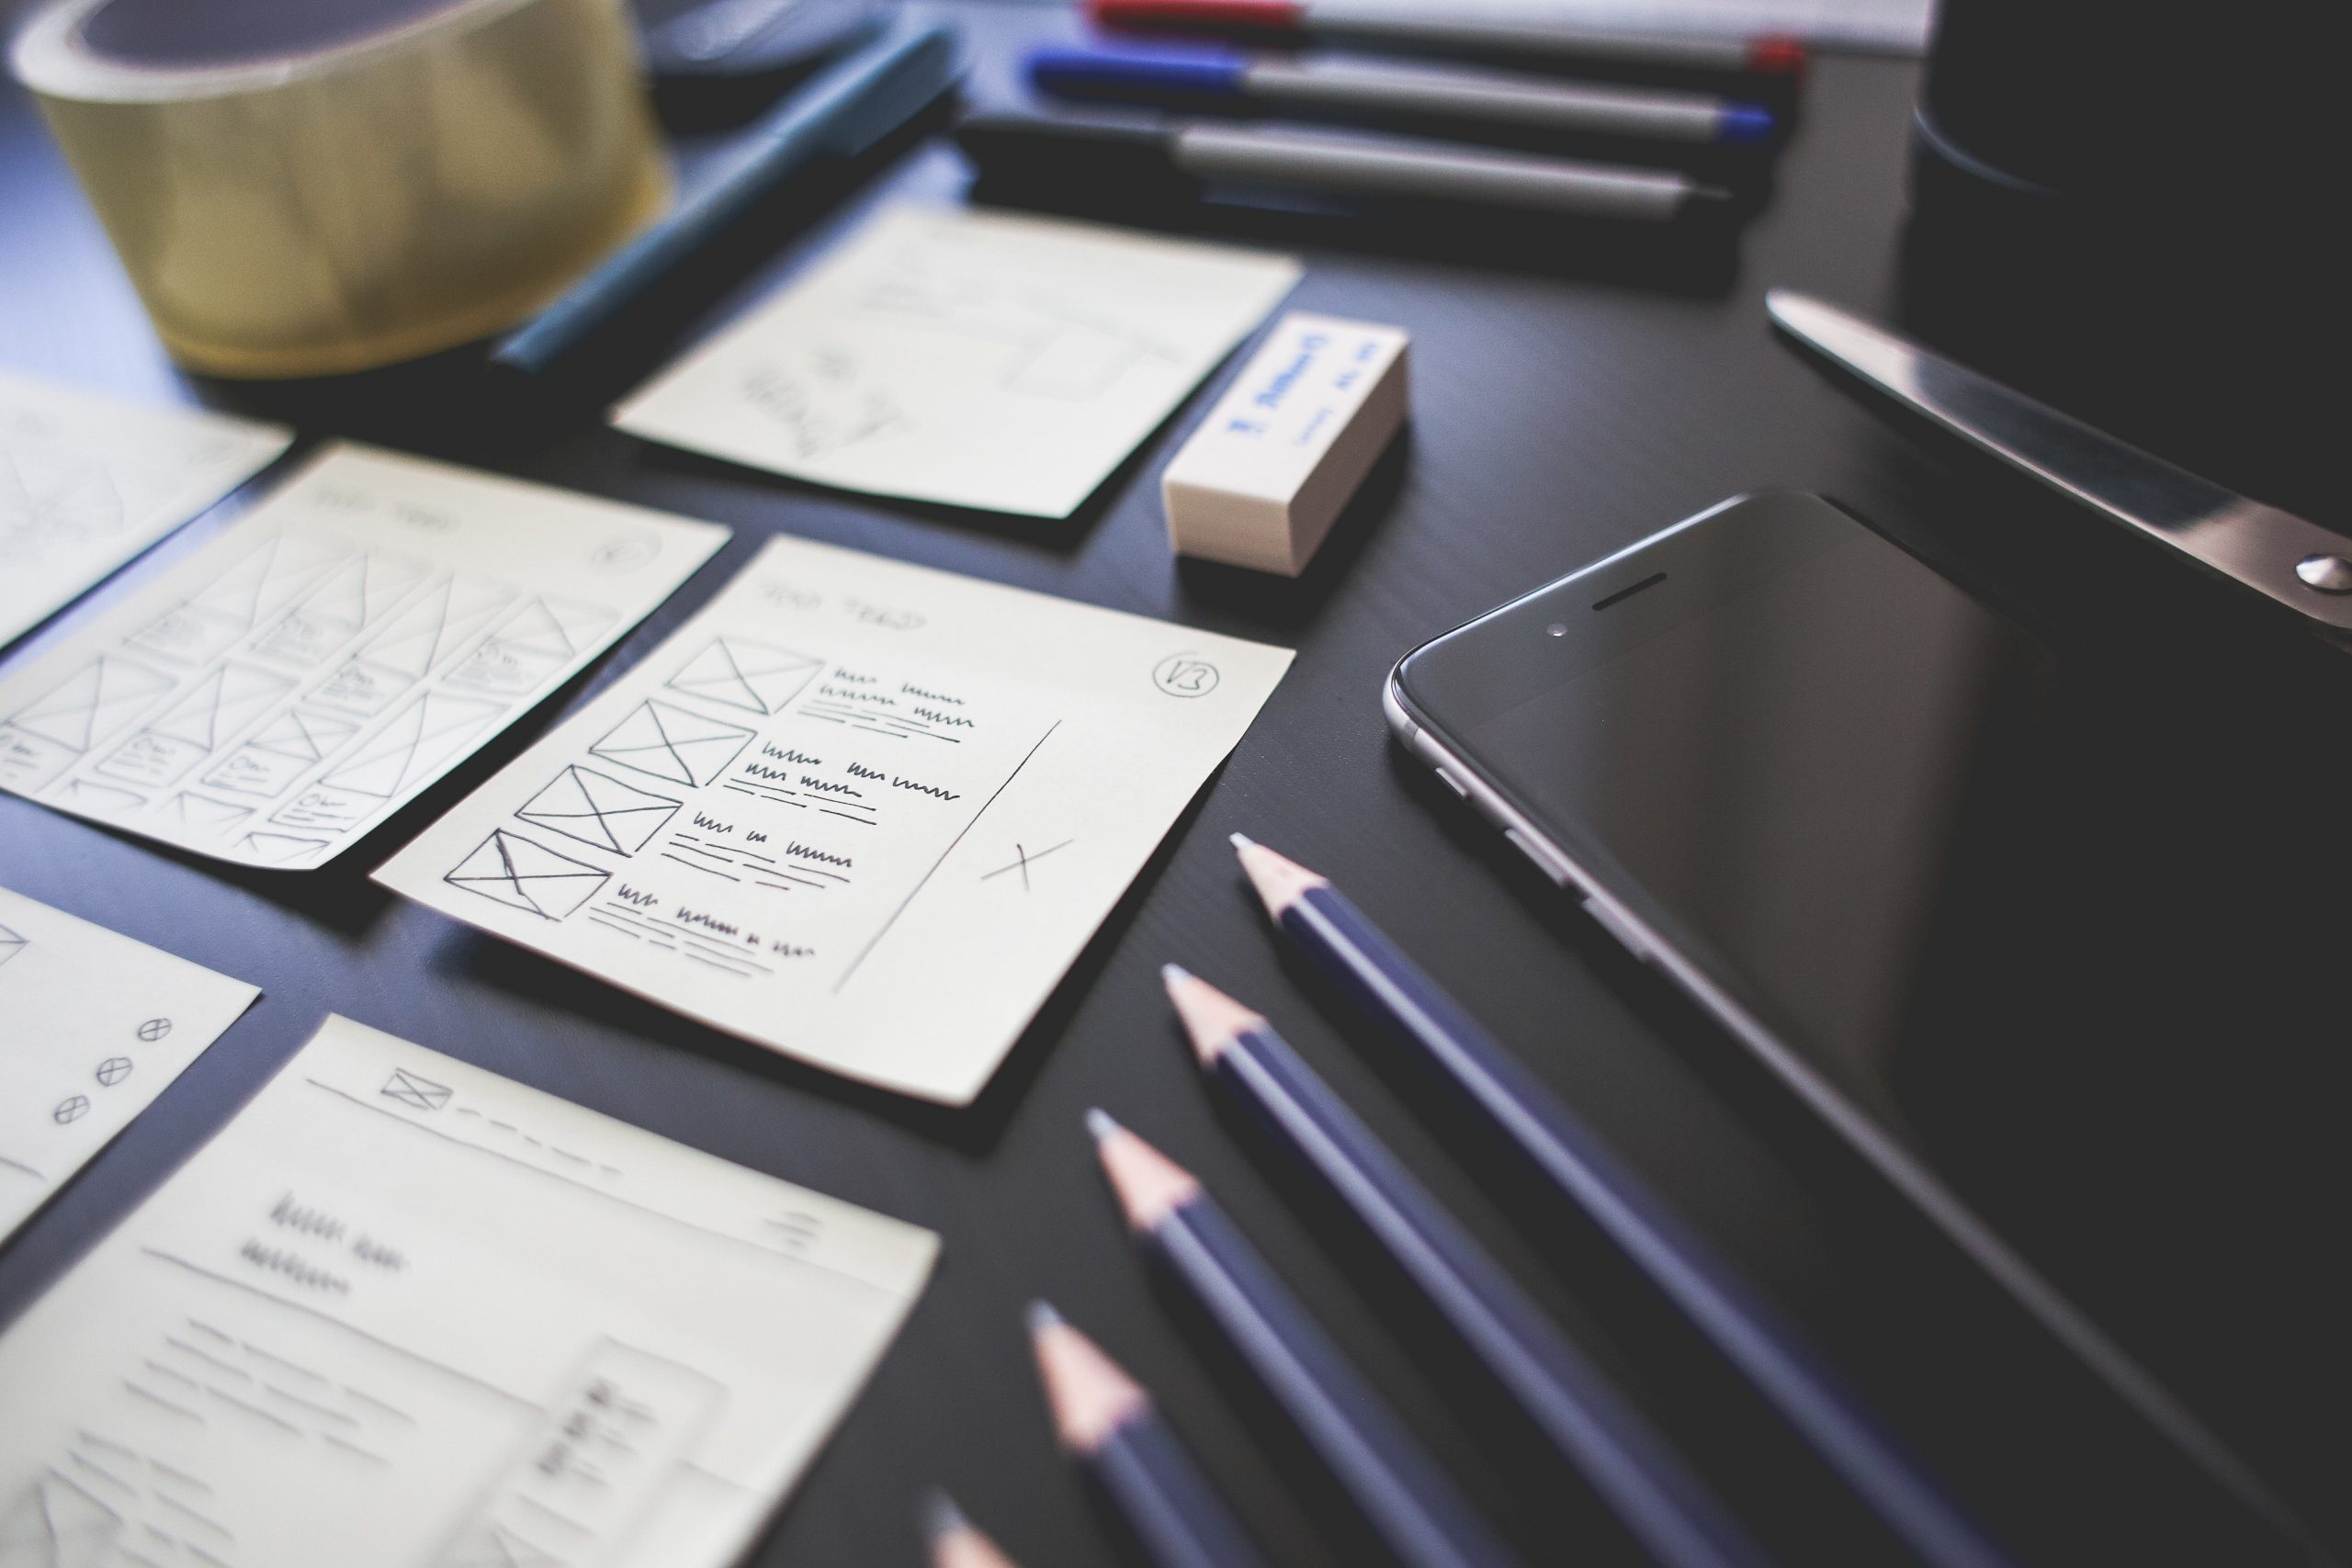 A desk with wireframe sketches and pencils sit on top